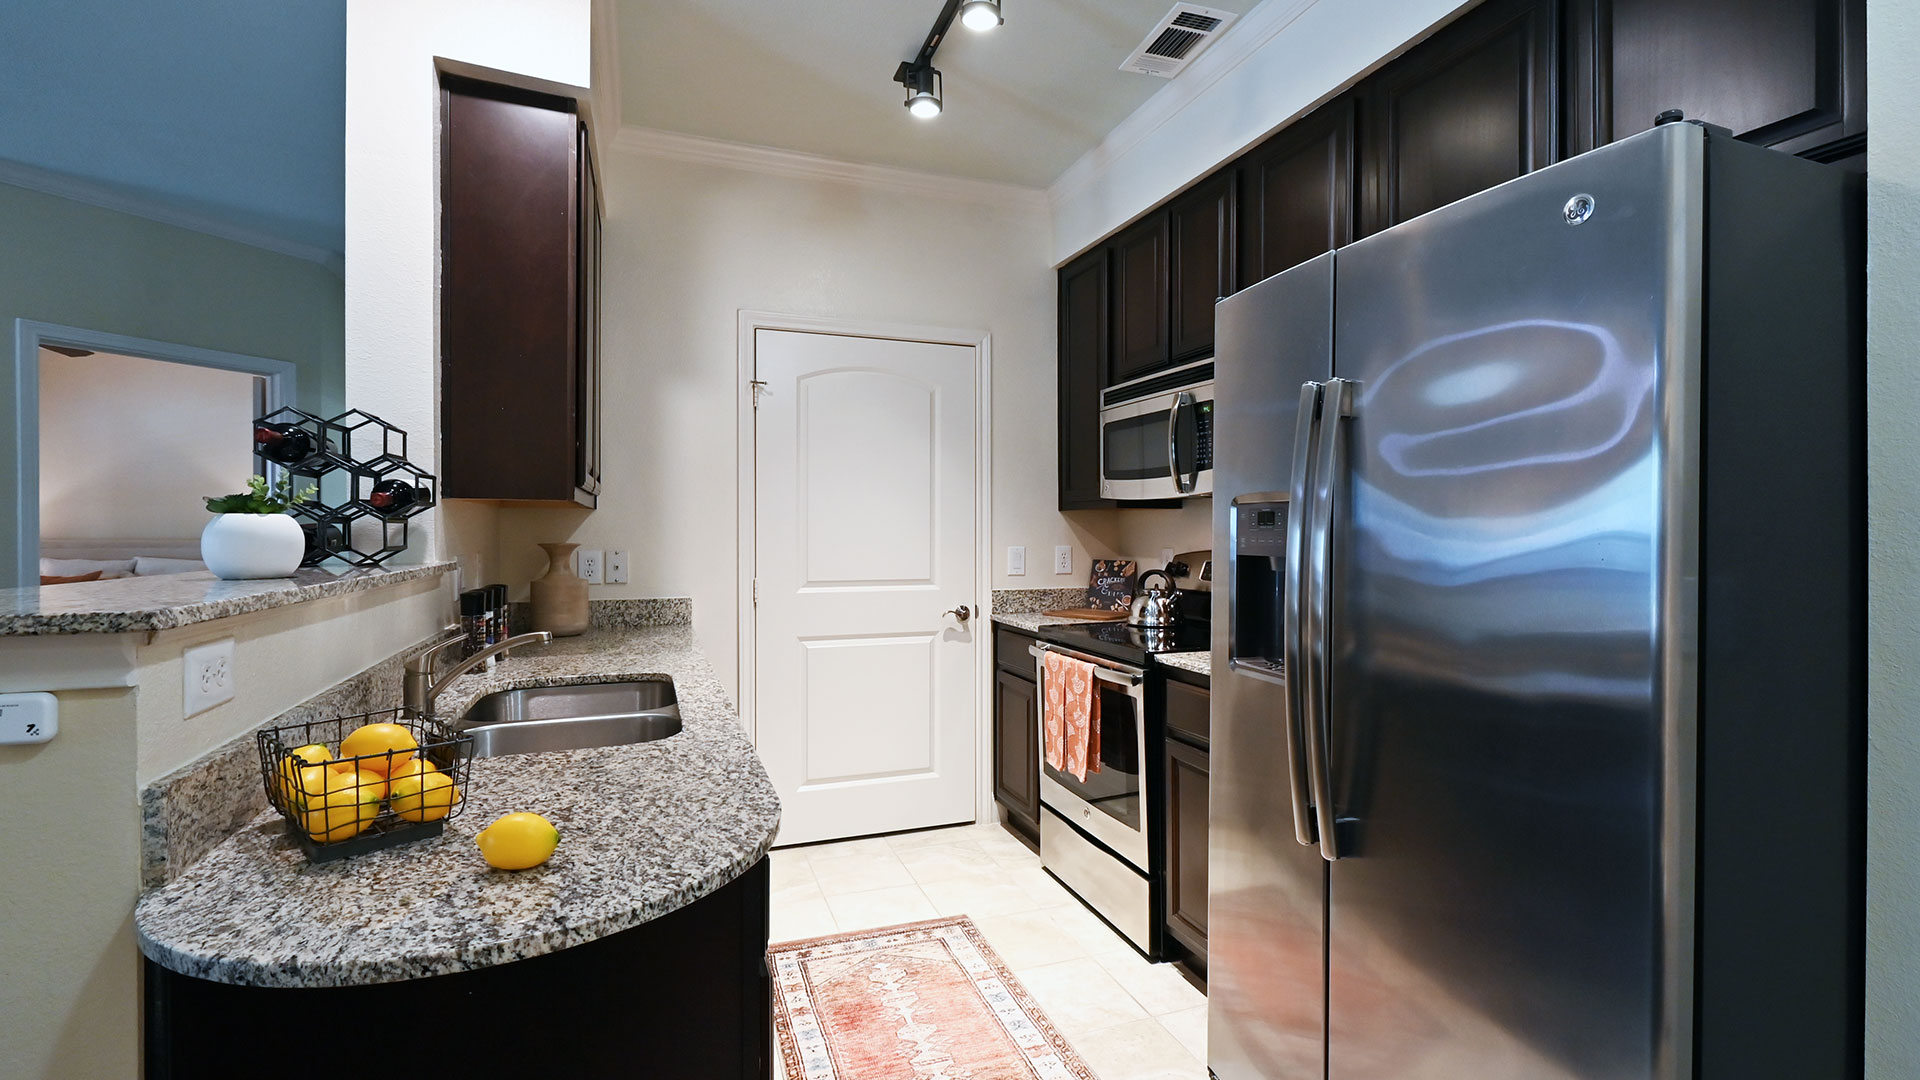 A galley kitchen with stainless appliances on the right and a counter with sink on the left.